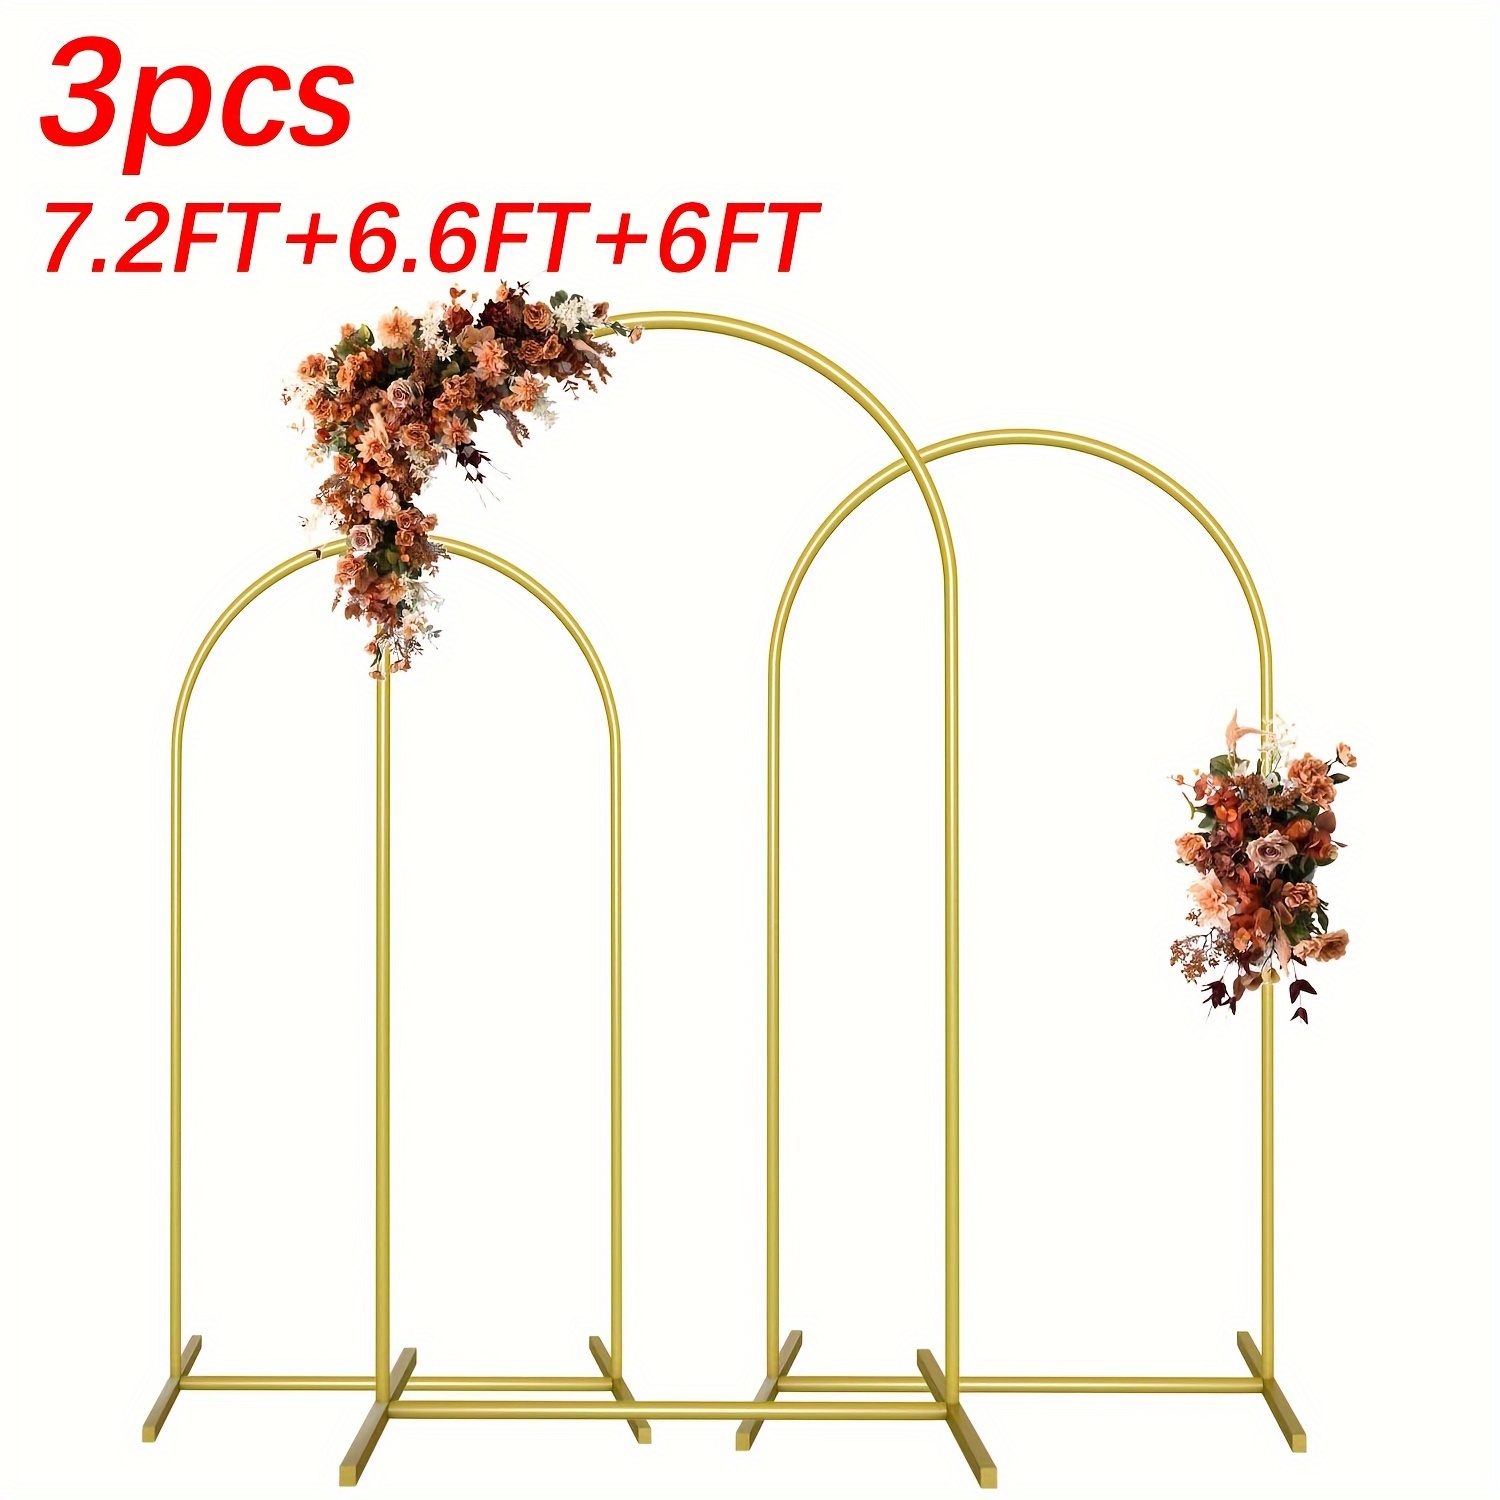 

Set (7.2ft, 6.6ft, 6ft)wedding Arch Backdrop Stand Set Of 3 Gold Metal Arched Frame For Ceremony Parties Birthday Baby Shower Garden Balloon Decoration